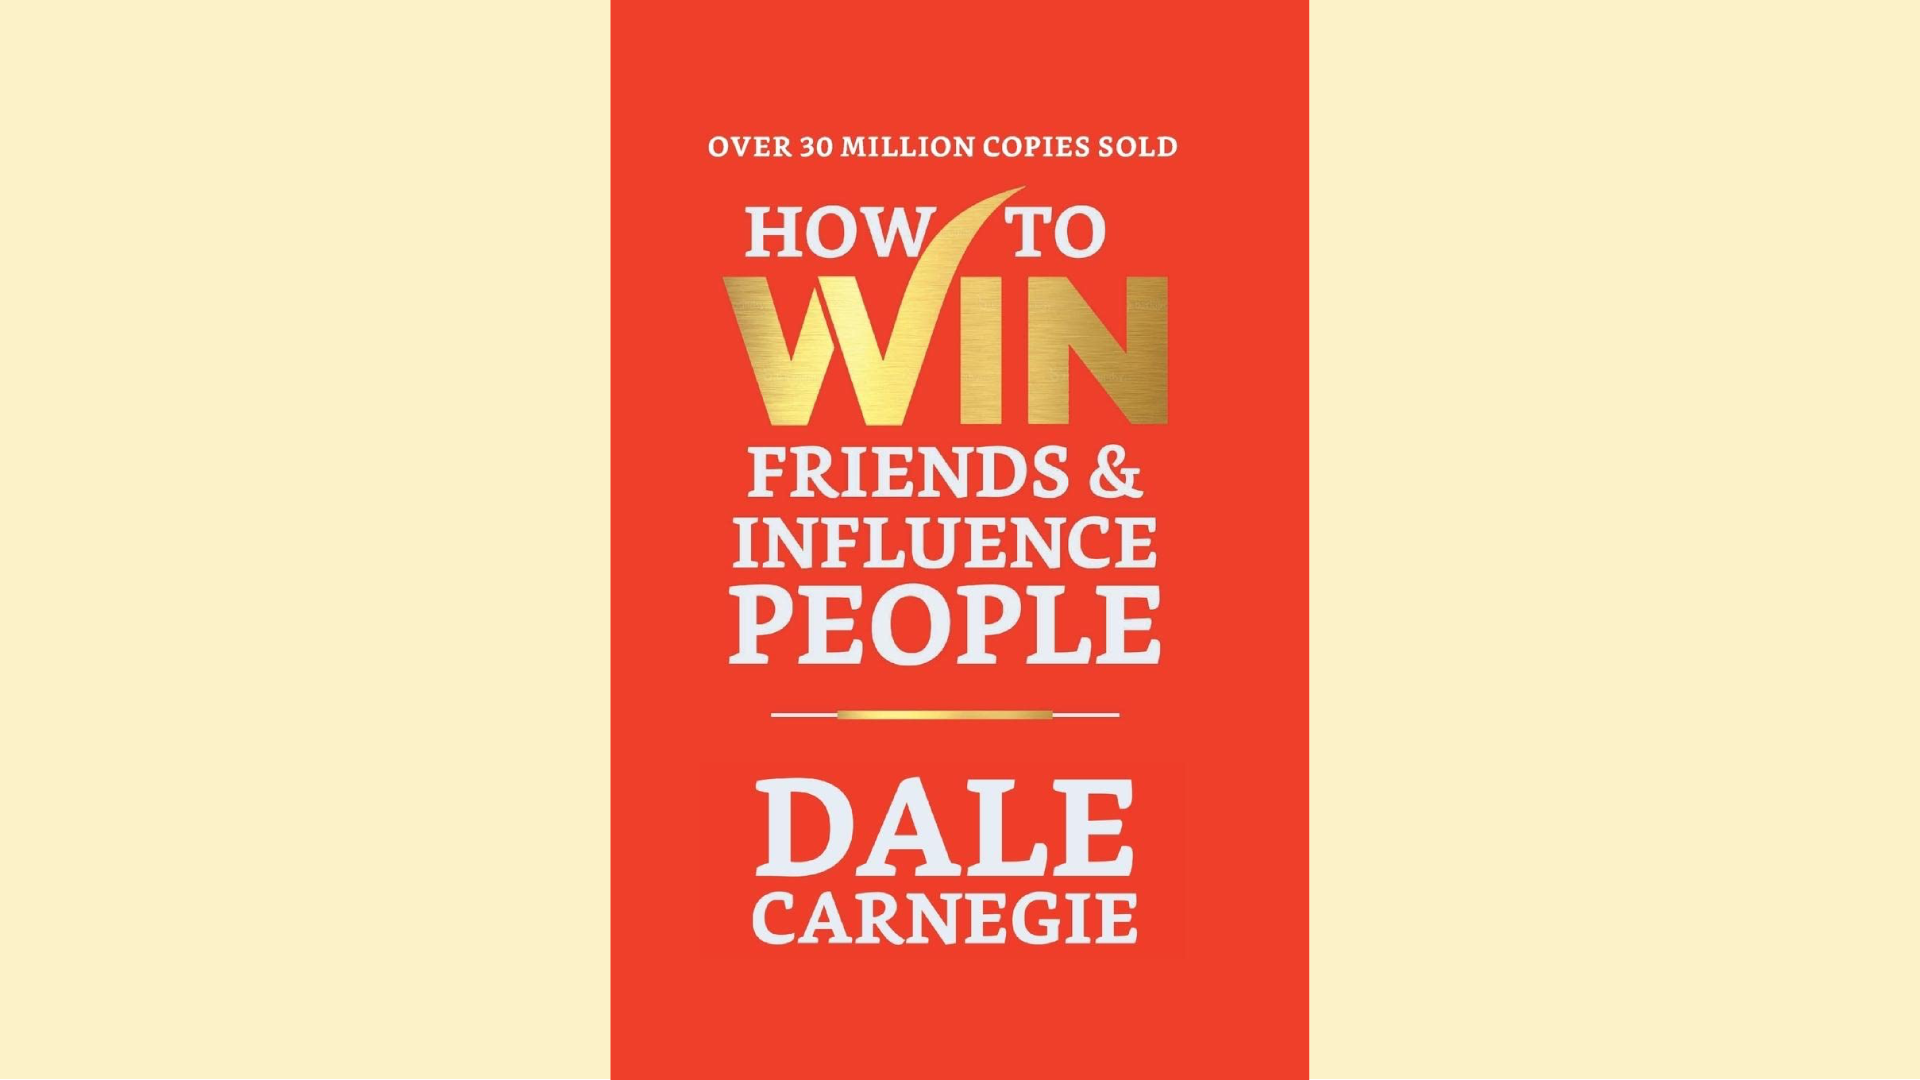 Summary: How To Win Friends and Influence People by Dale Carnegie